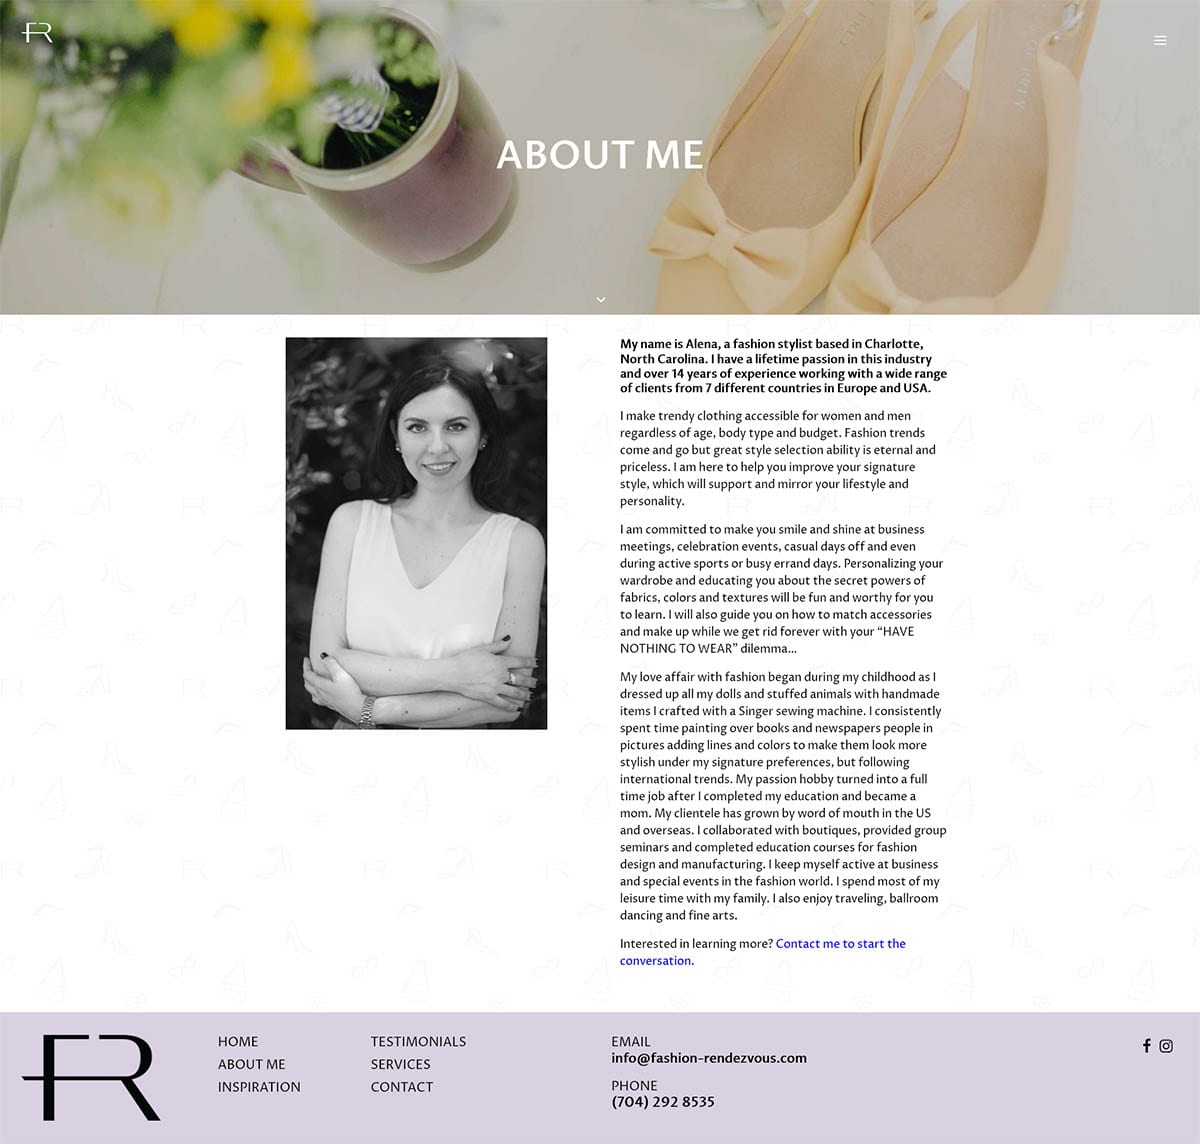 fashion rendezvous website screenshot about page